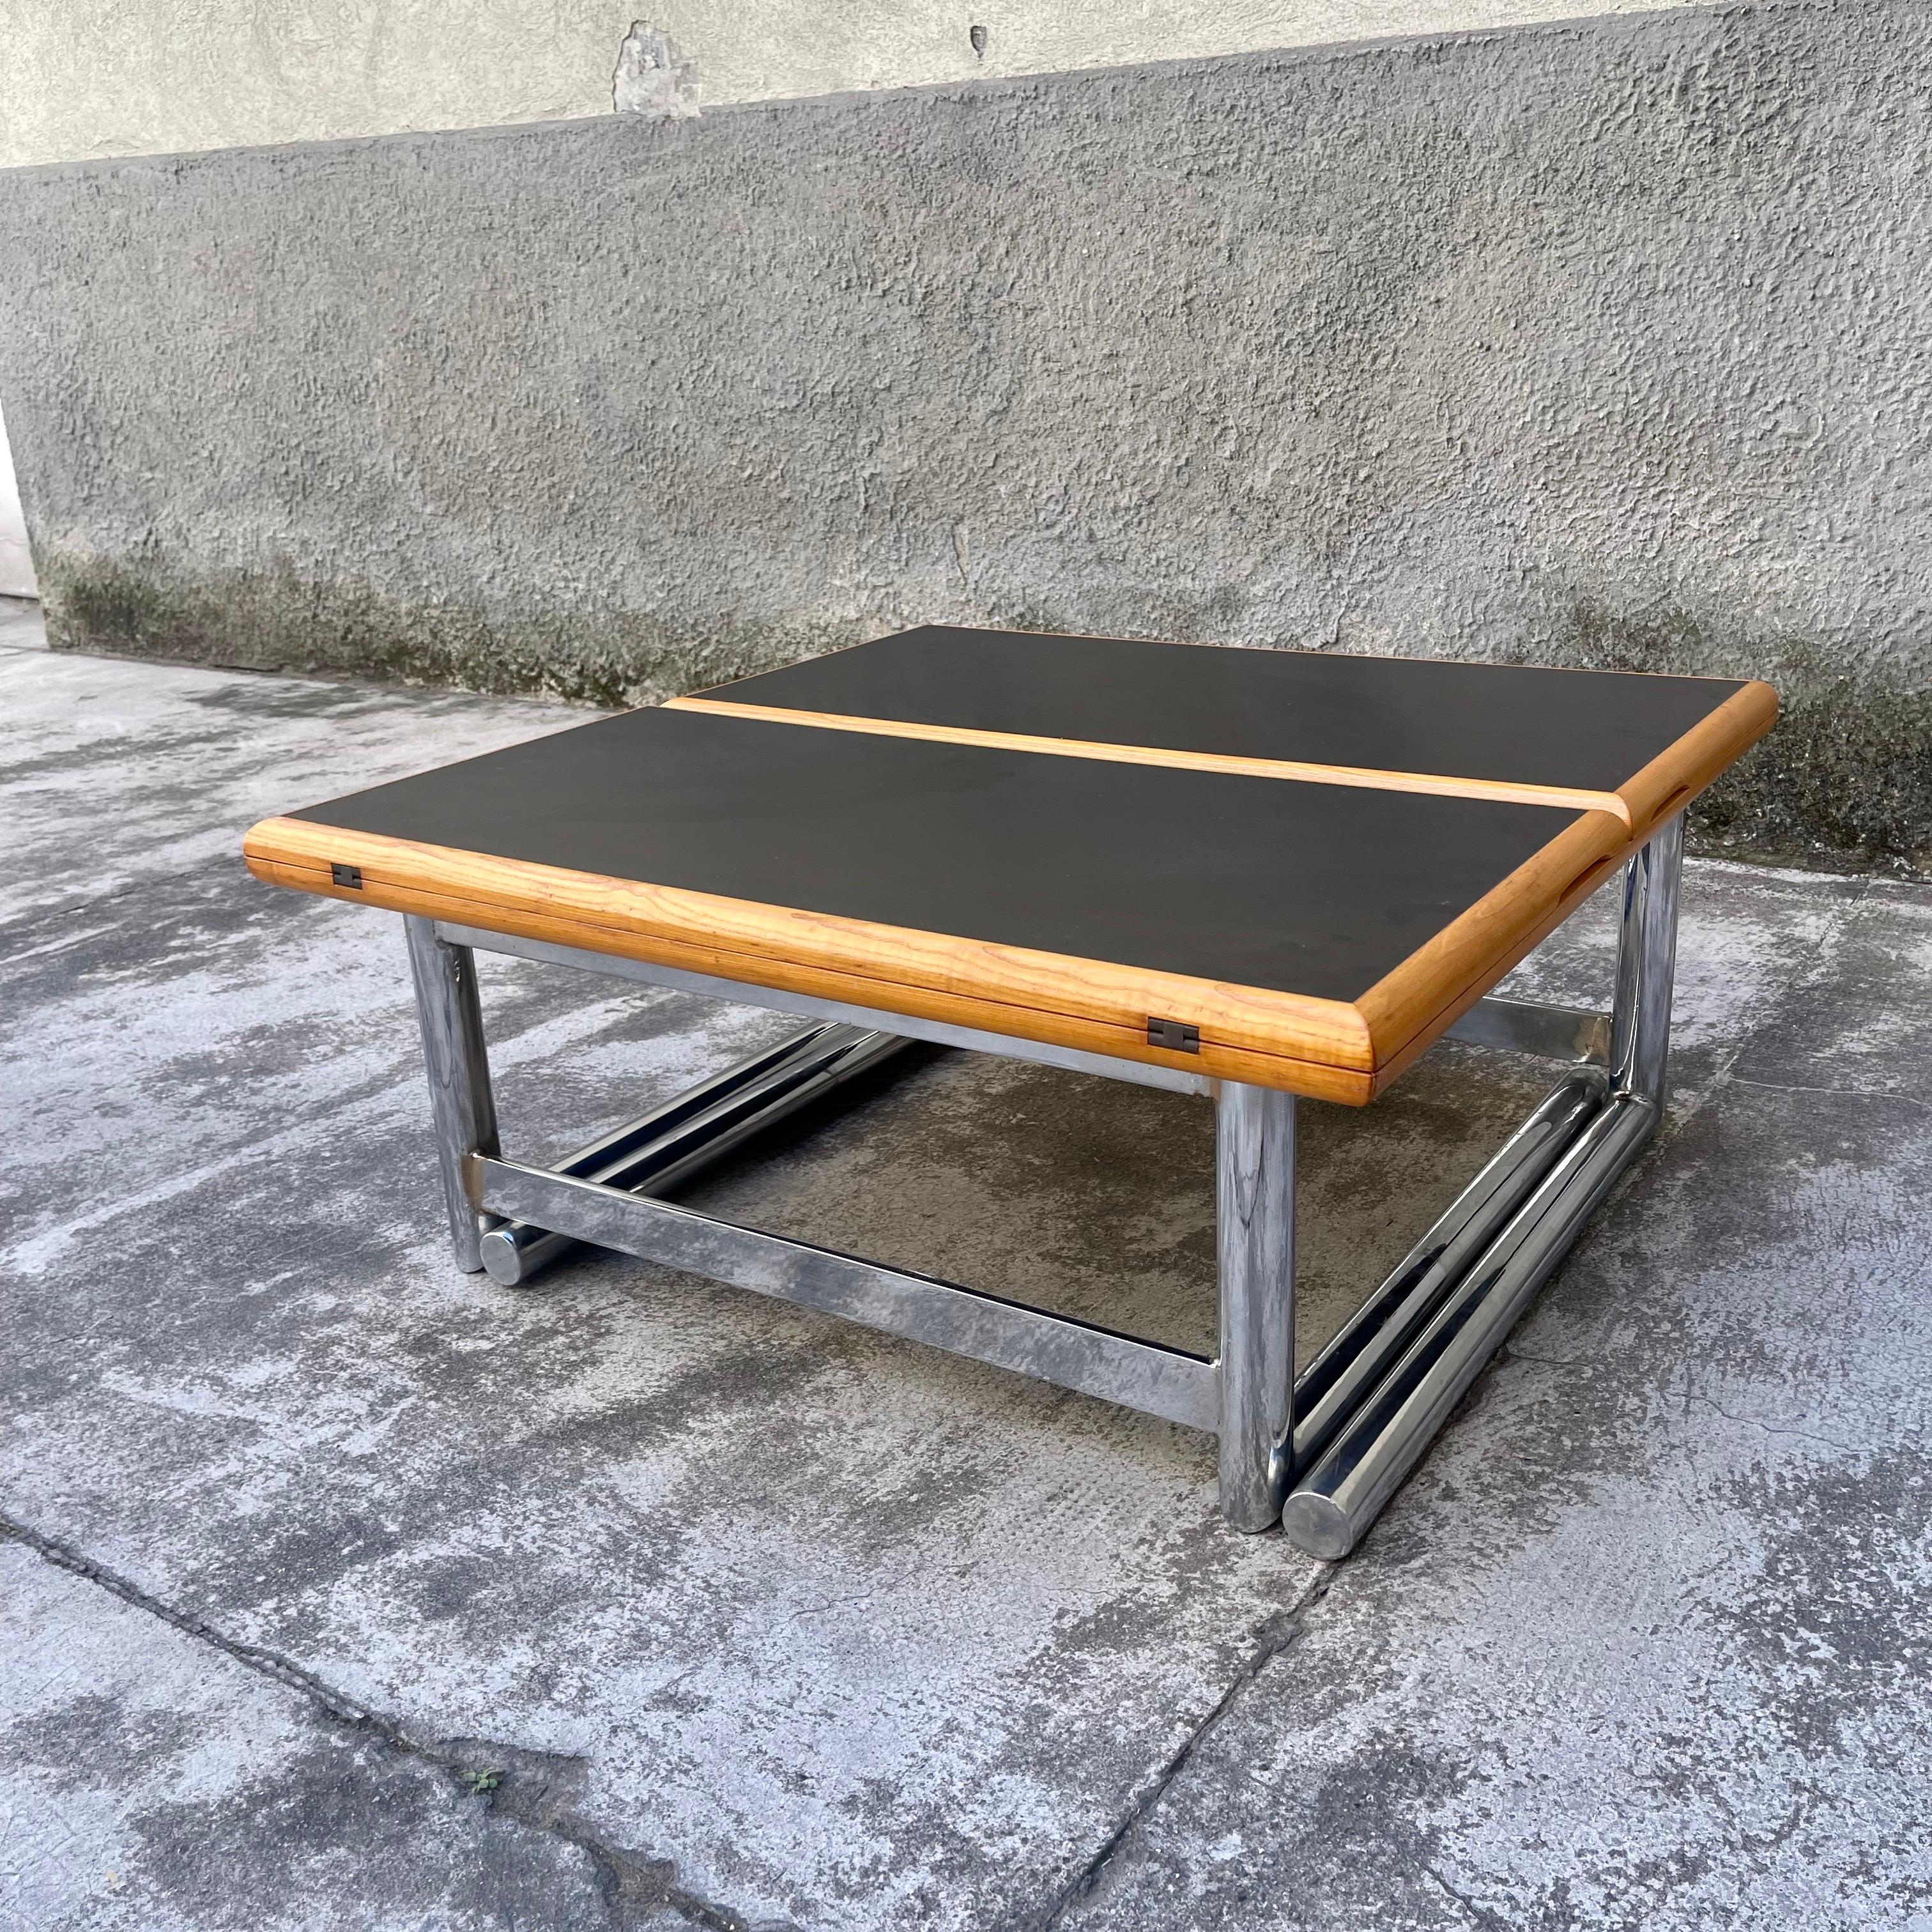 This very special square coffee table, fitted with solid steel legs, can be transformed into a large dining table by simply lifting it up so that the legs, opening, raise the top bringing it to the height of a dining table. At this point it will be